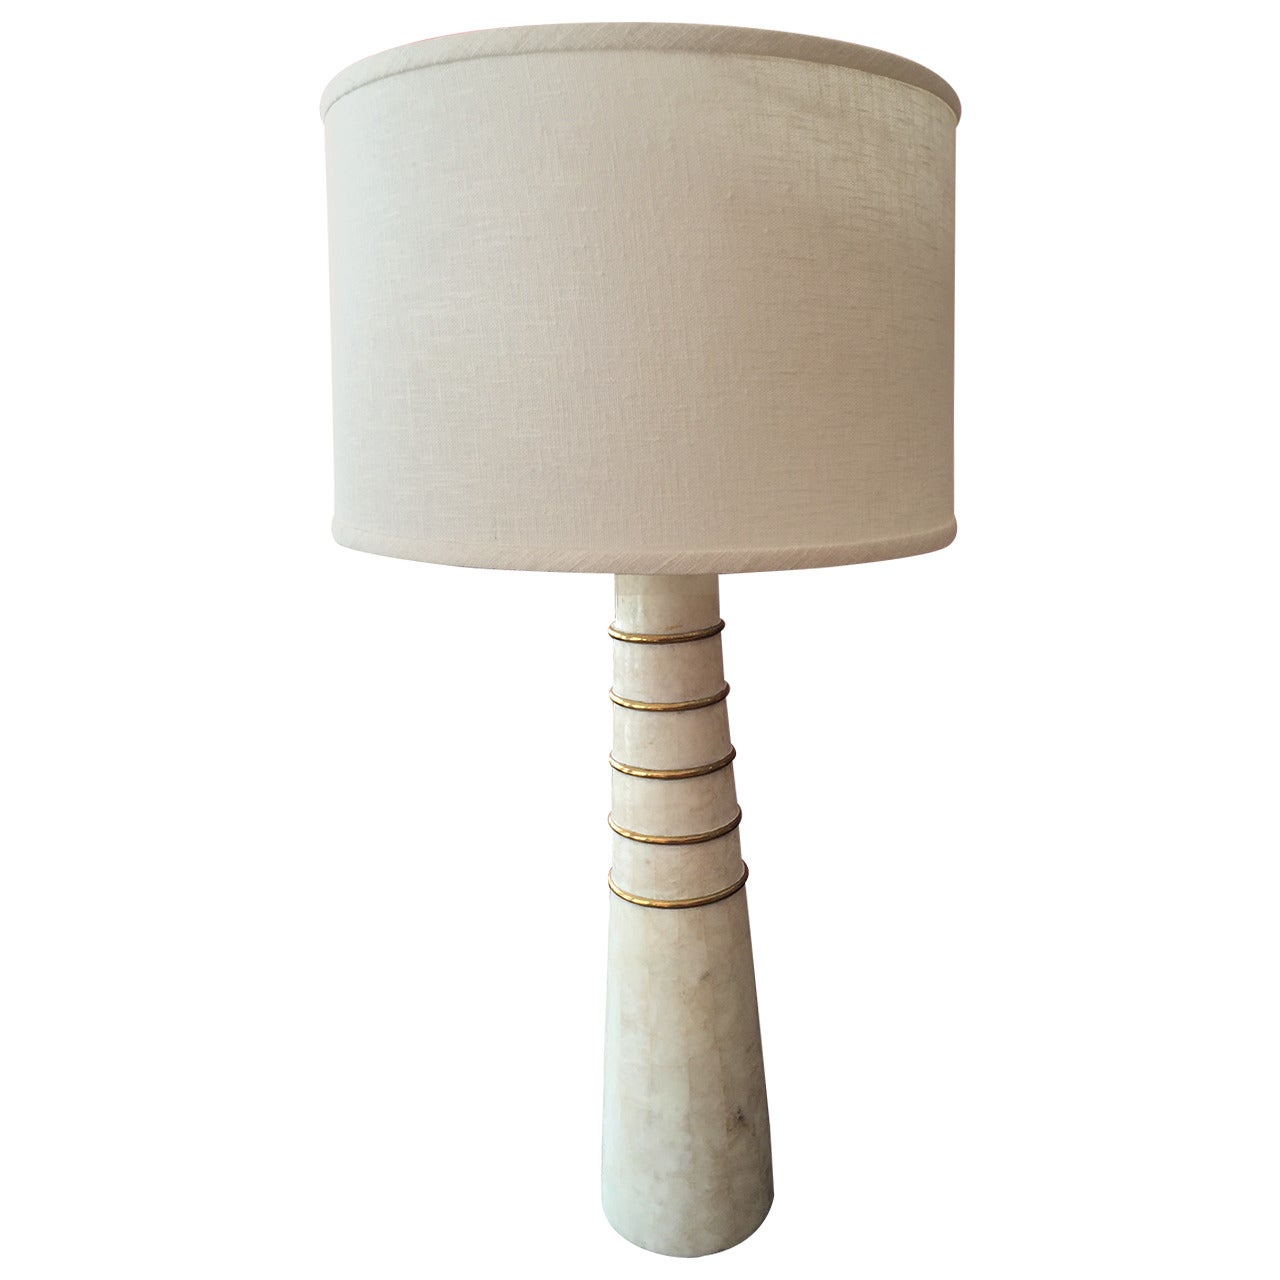 Kelly Wearstler Tessellated Table Lamp For Sale